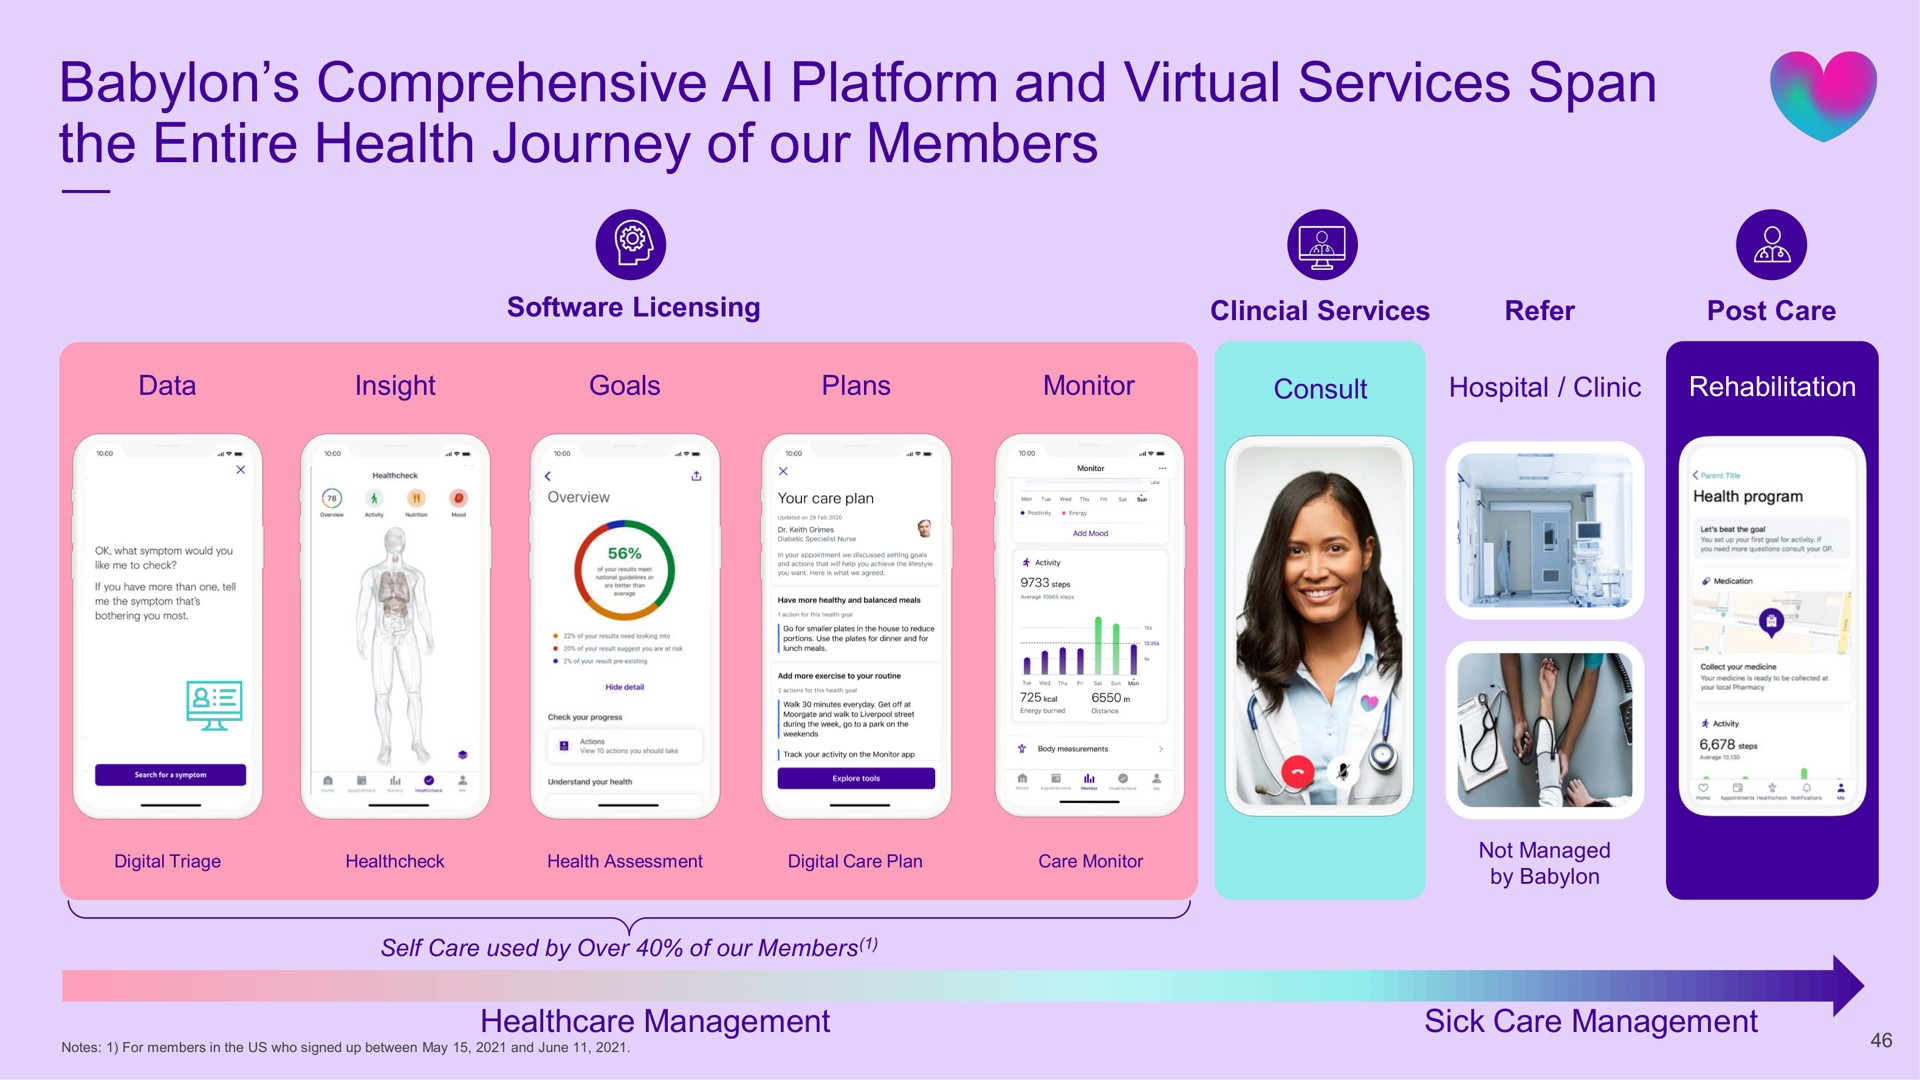 comprehensive platform and virtual services span the entire health journey of our members | Babylon